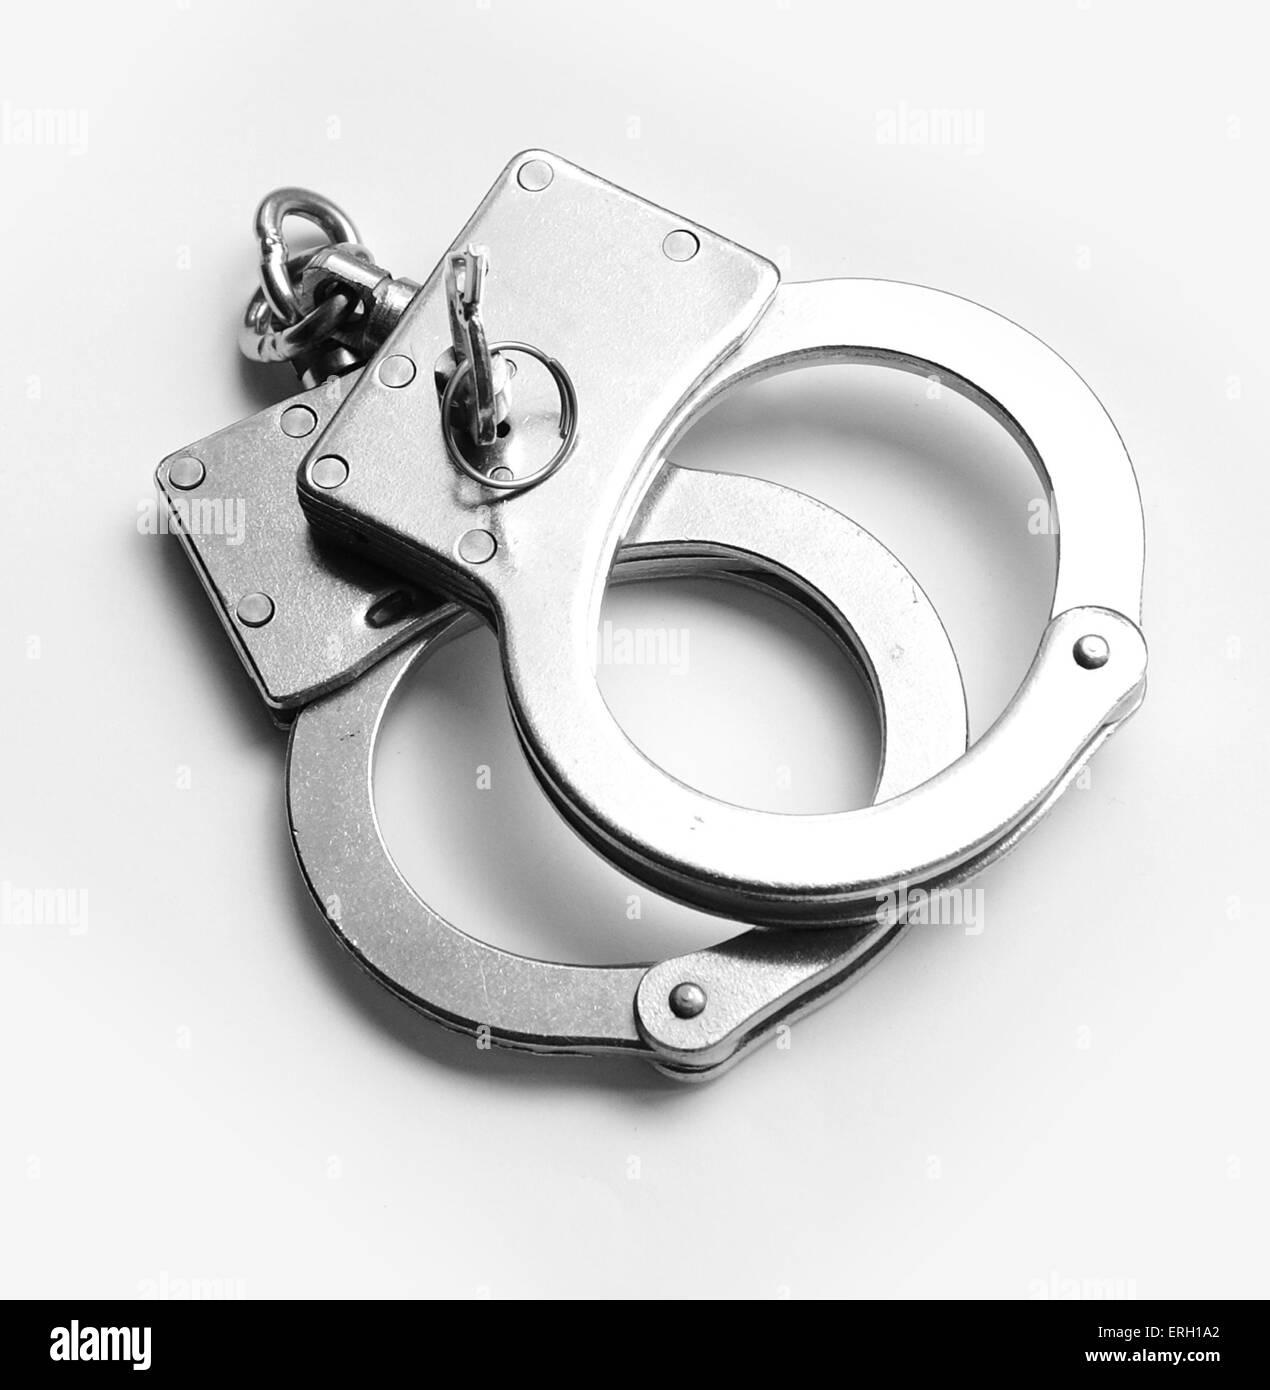 hand cuffs captures criminal who breaking law Stock Photo